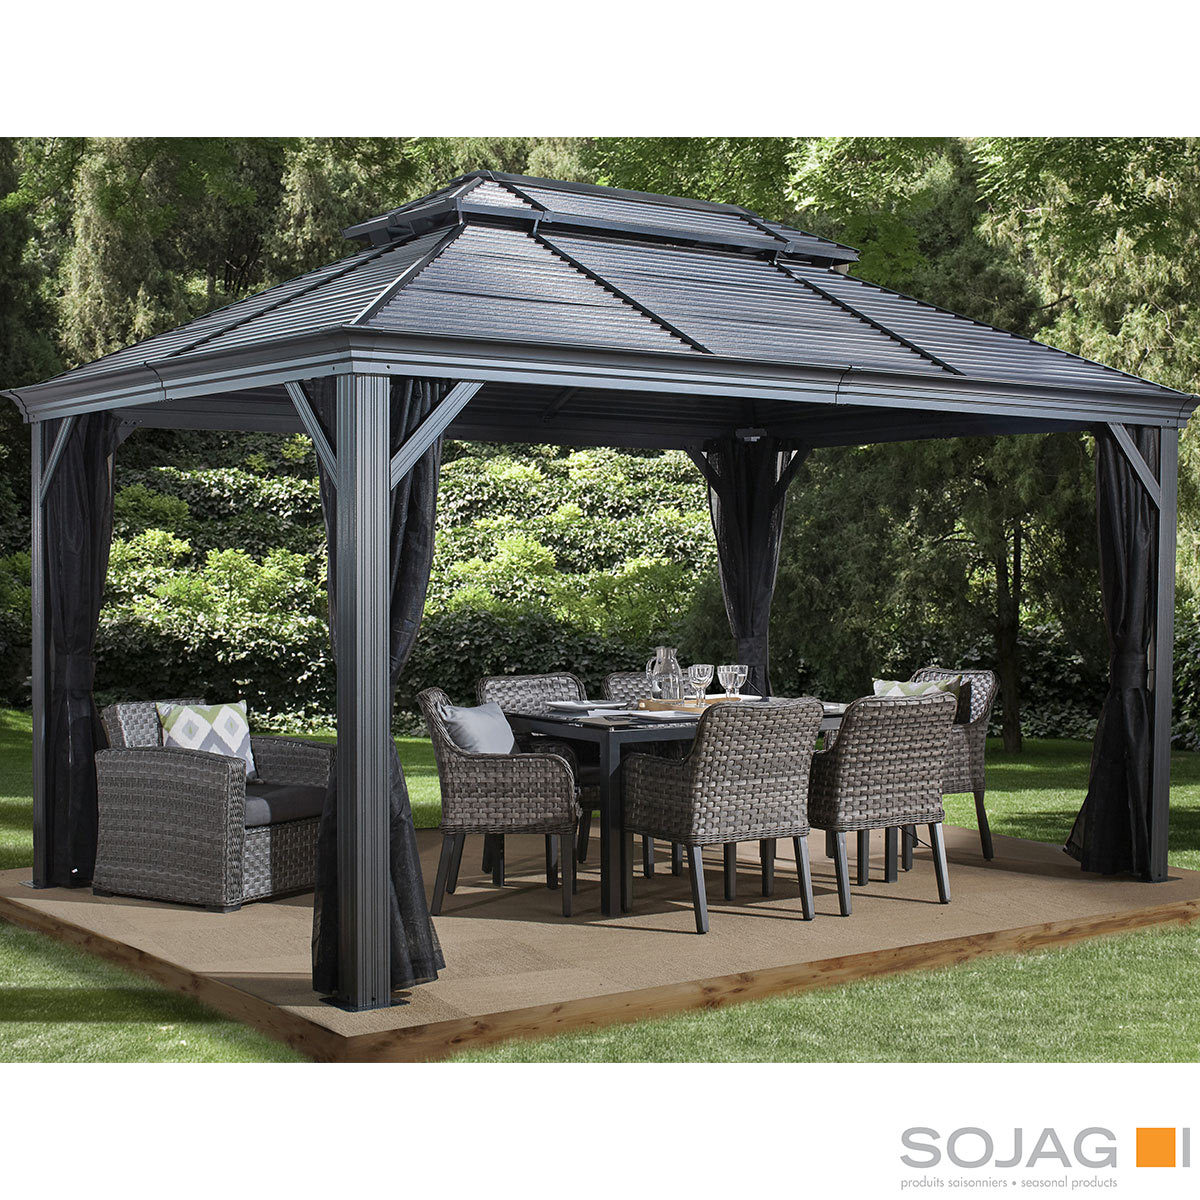 Sojag Mykonos 12 x 16 Double Roof